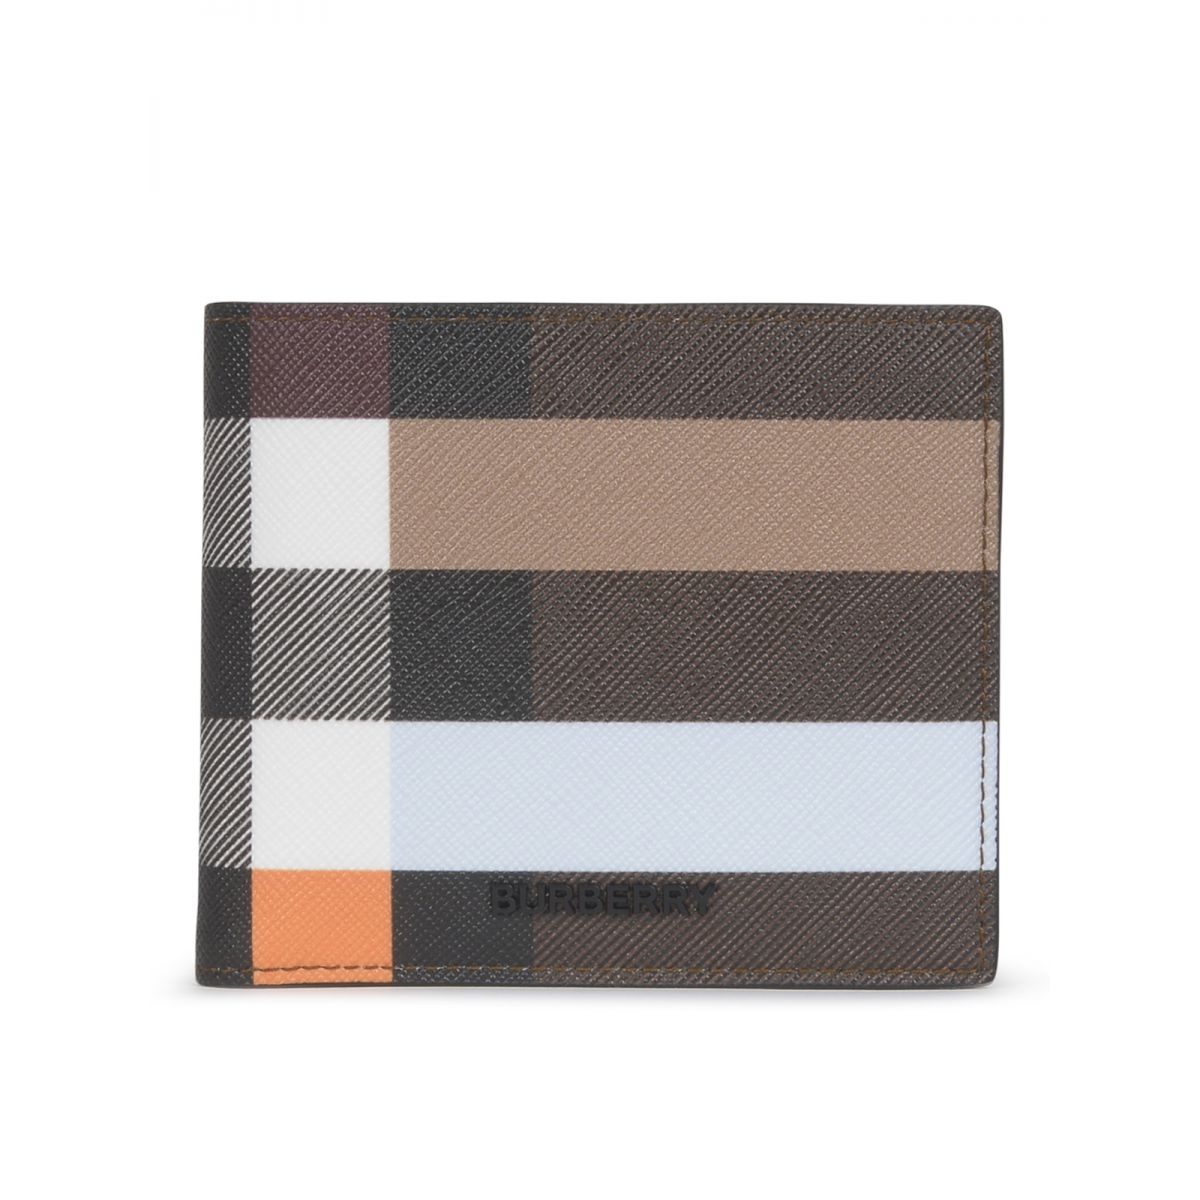 BURBERRY - Burberry wallet with colour block design